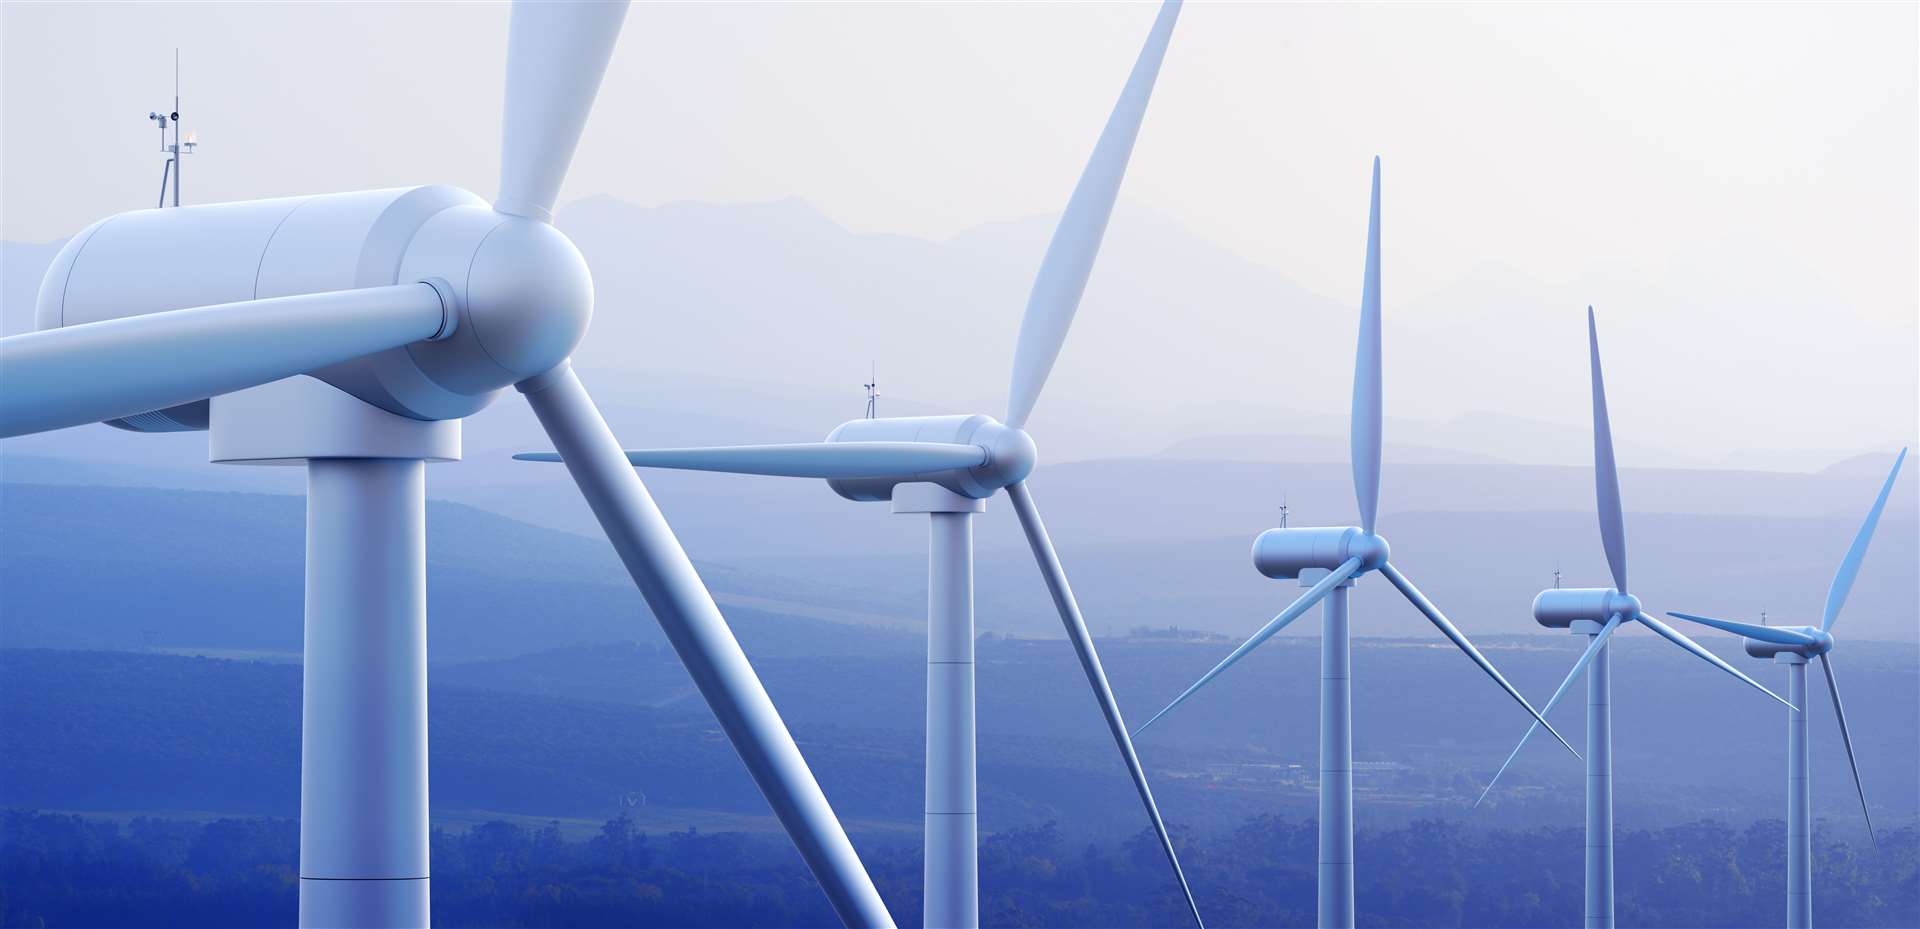 Developers have in recent years opted for fewer but taller turbines, which can capture wind energy more efficiently.